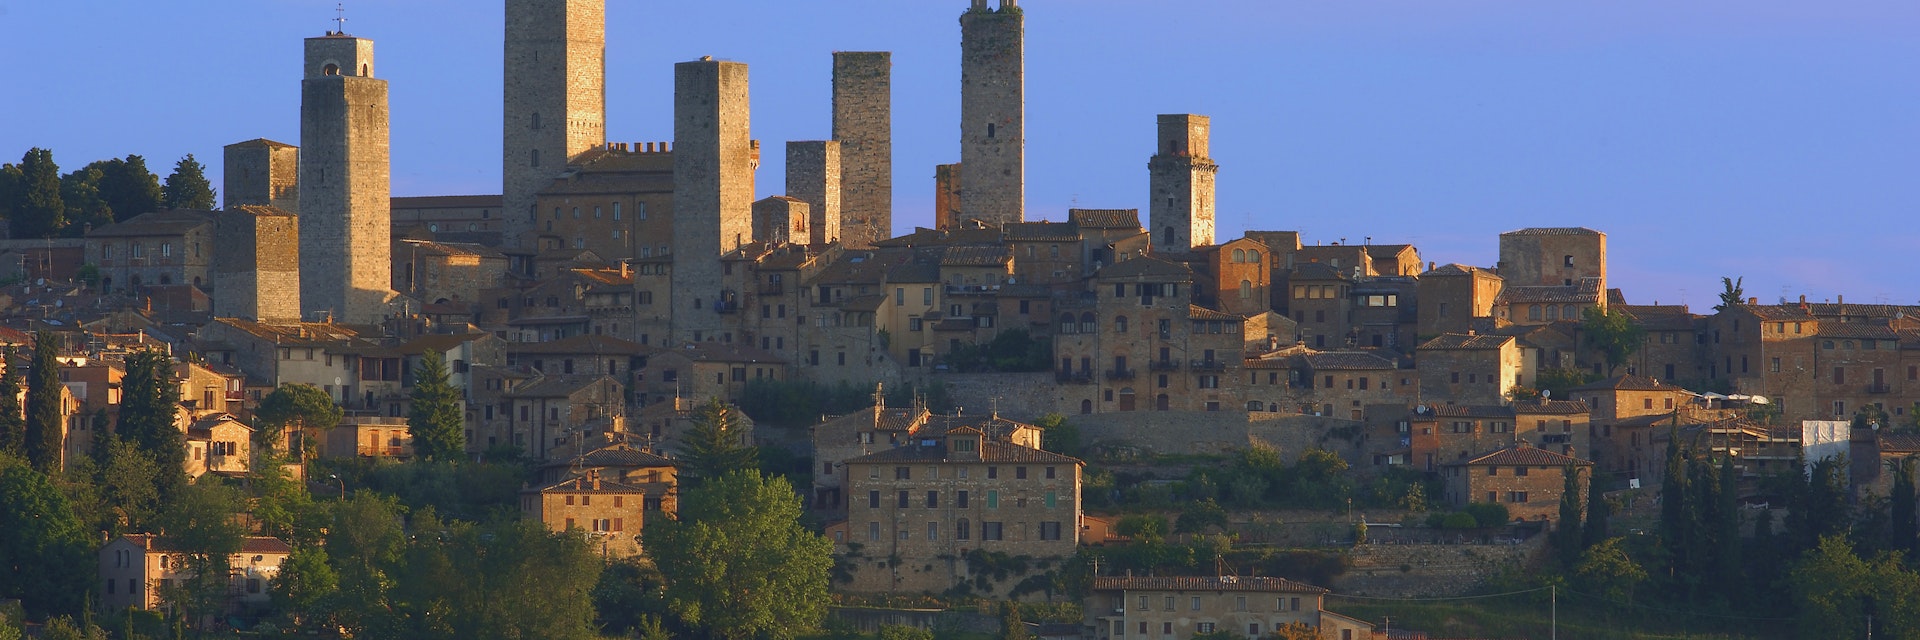 San Gimignano, Tuscany, Italy Siena Province, UNESCO World Heritage Site. (Photo by: Education Images/UIG via Getty Images)